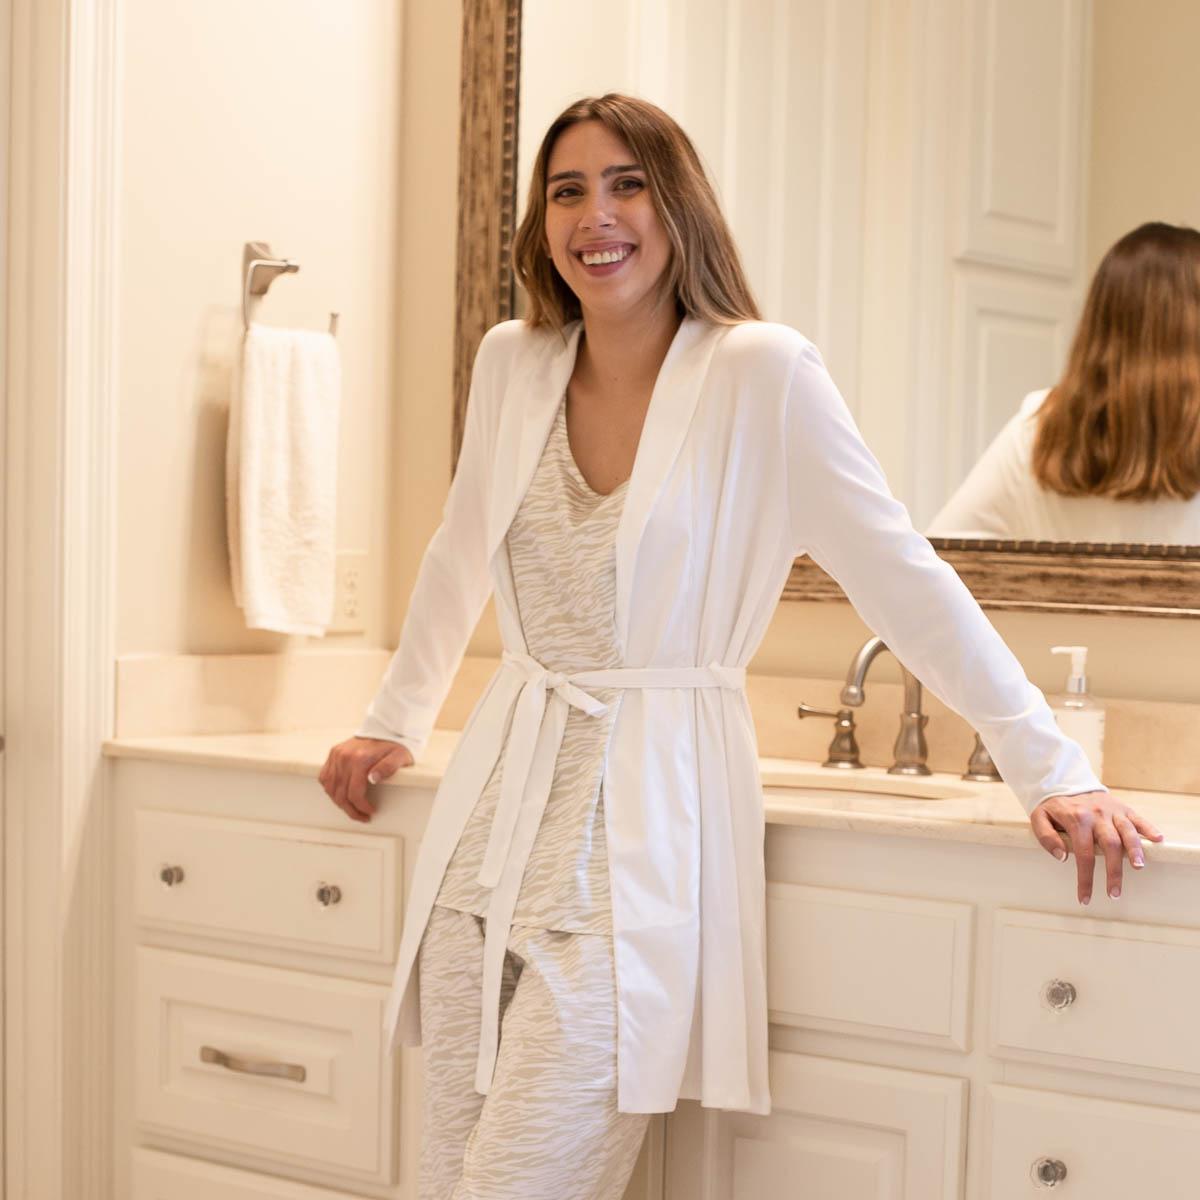 Dressing Gowns & Bathrobes, Slippers | Shop online at Pearl Switzerland! -  PEARL